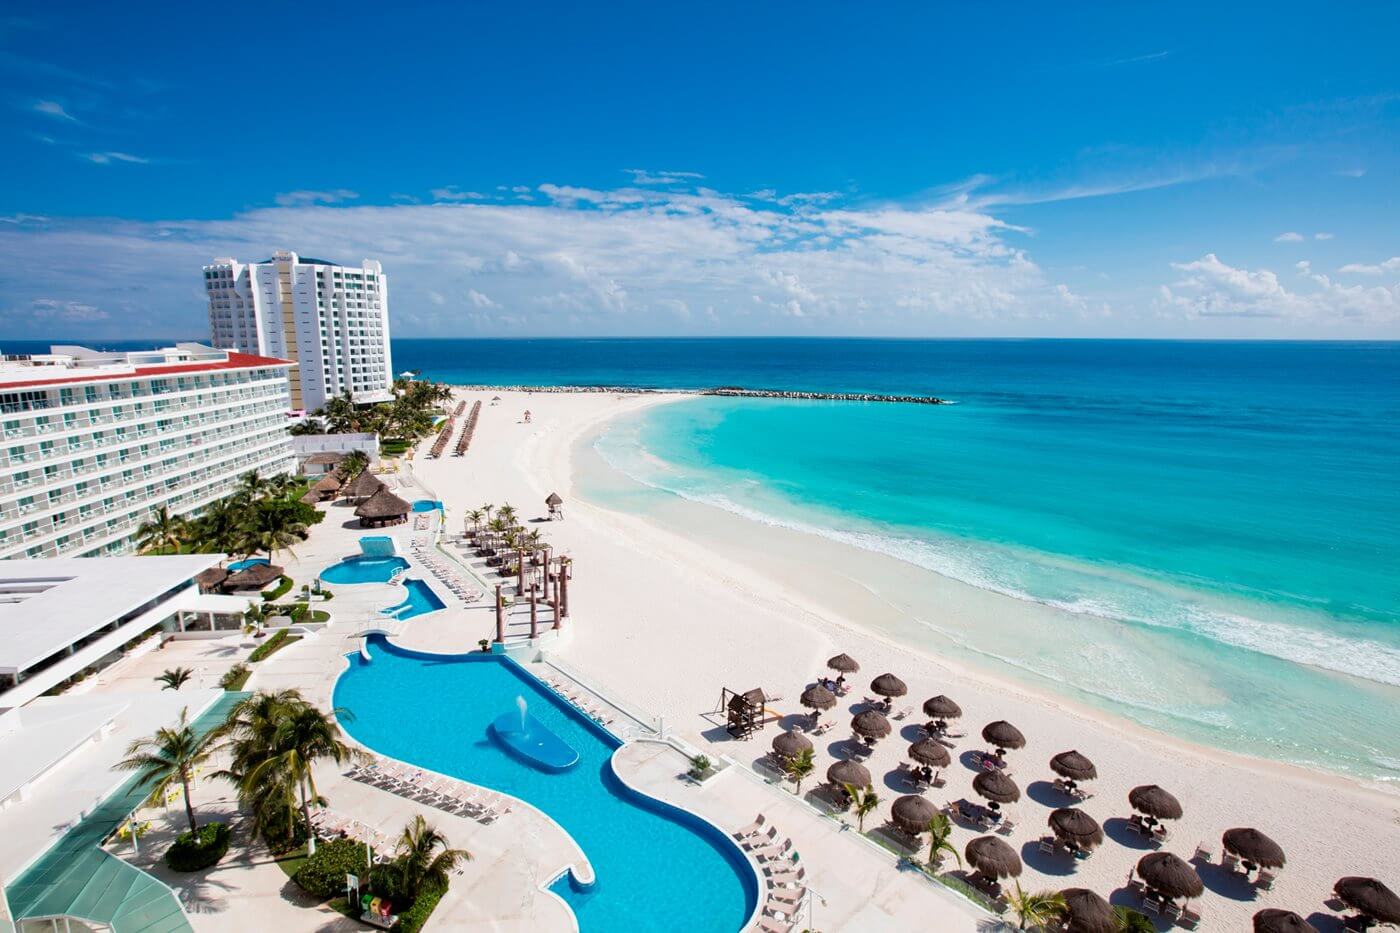 tourist places in mexico: Cancun